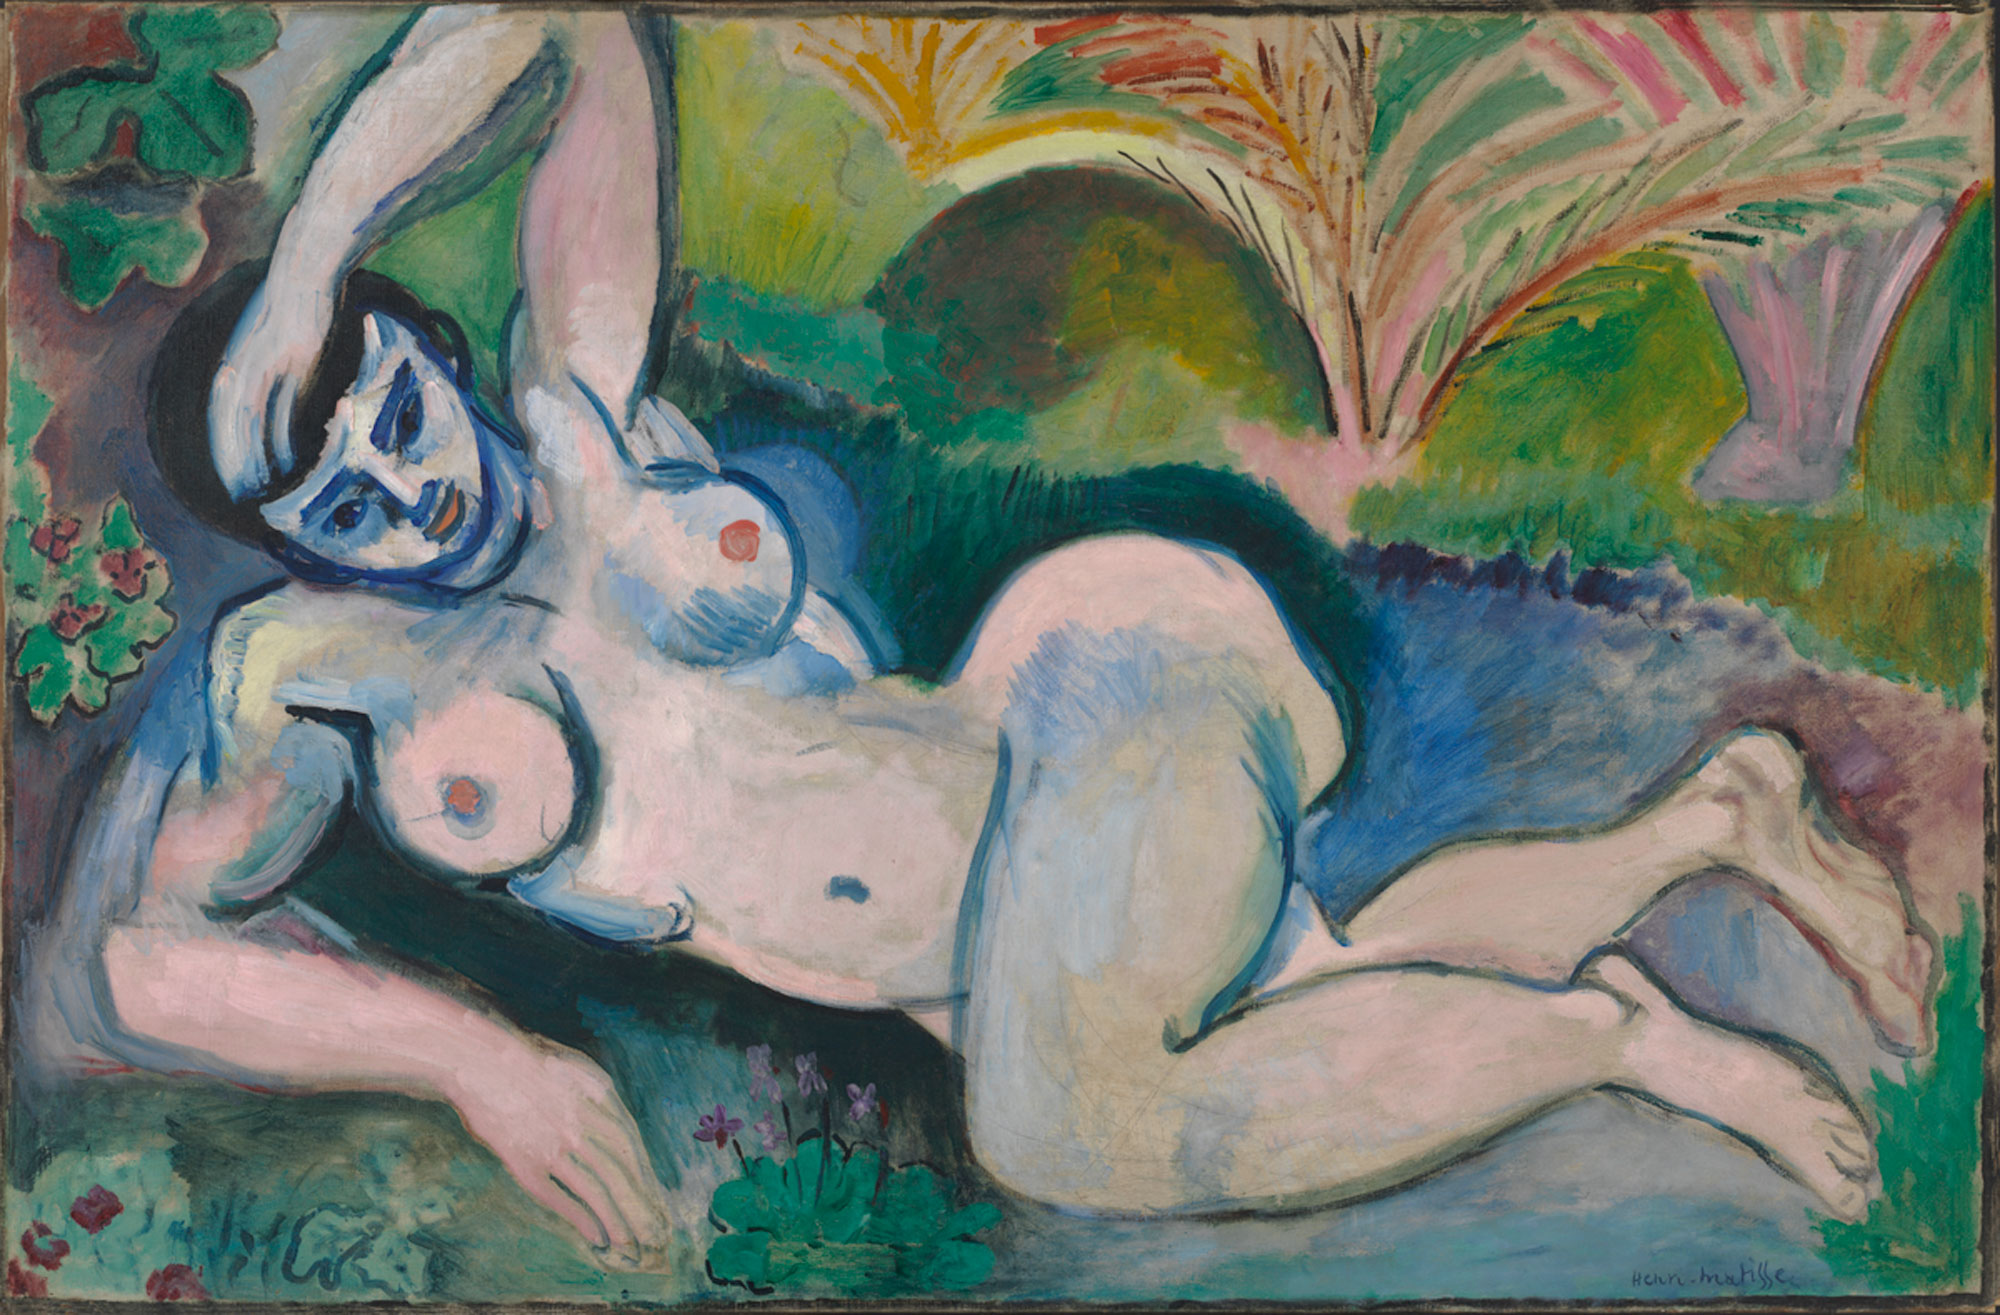 Henri Matisse, Blue Nude (Memory of Biskra), 1907, oil on canvas, 36 1/4 x 56 1/8 inches (Baltimore Museum of Art)